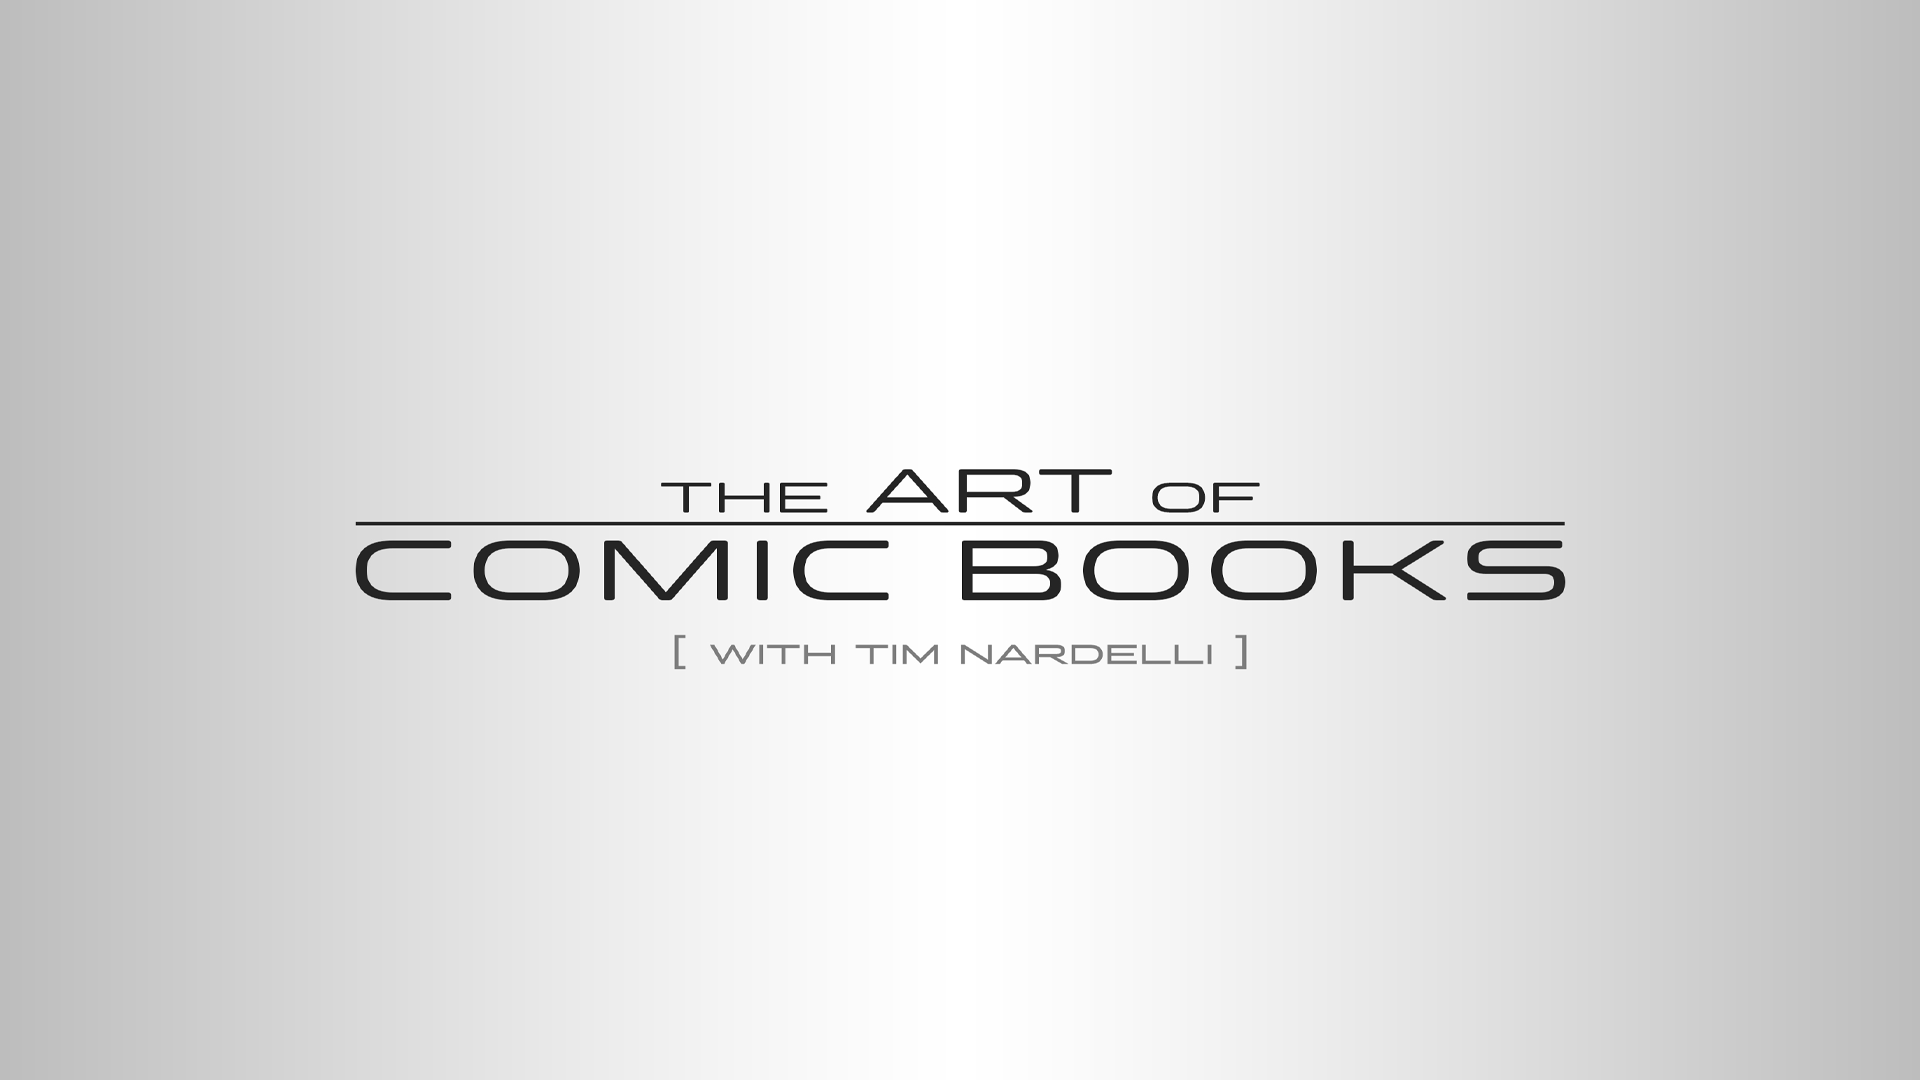 ‘The Art Of Comic Books’ Feature Gives A Behind The Scenes Look At Making Comics